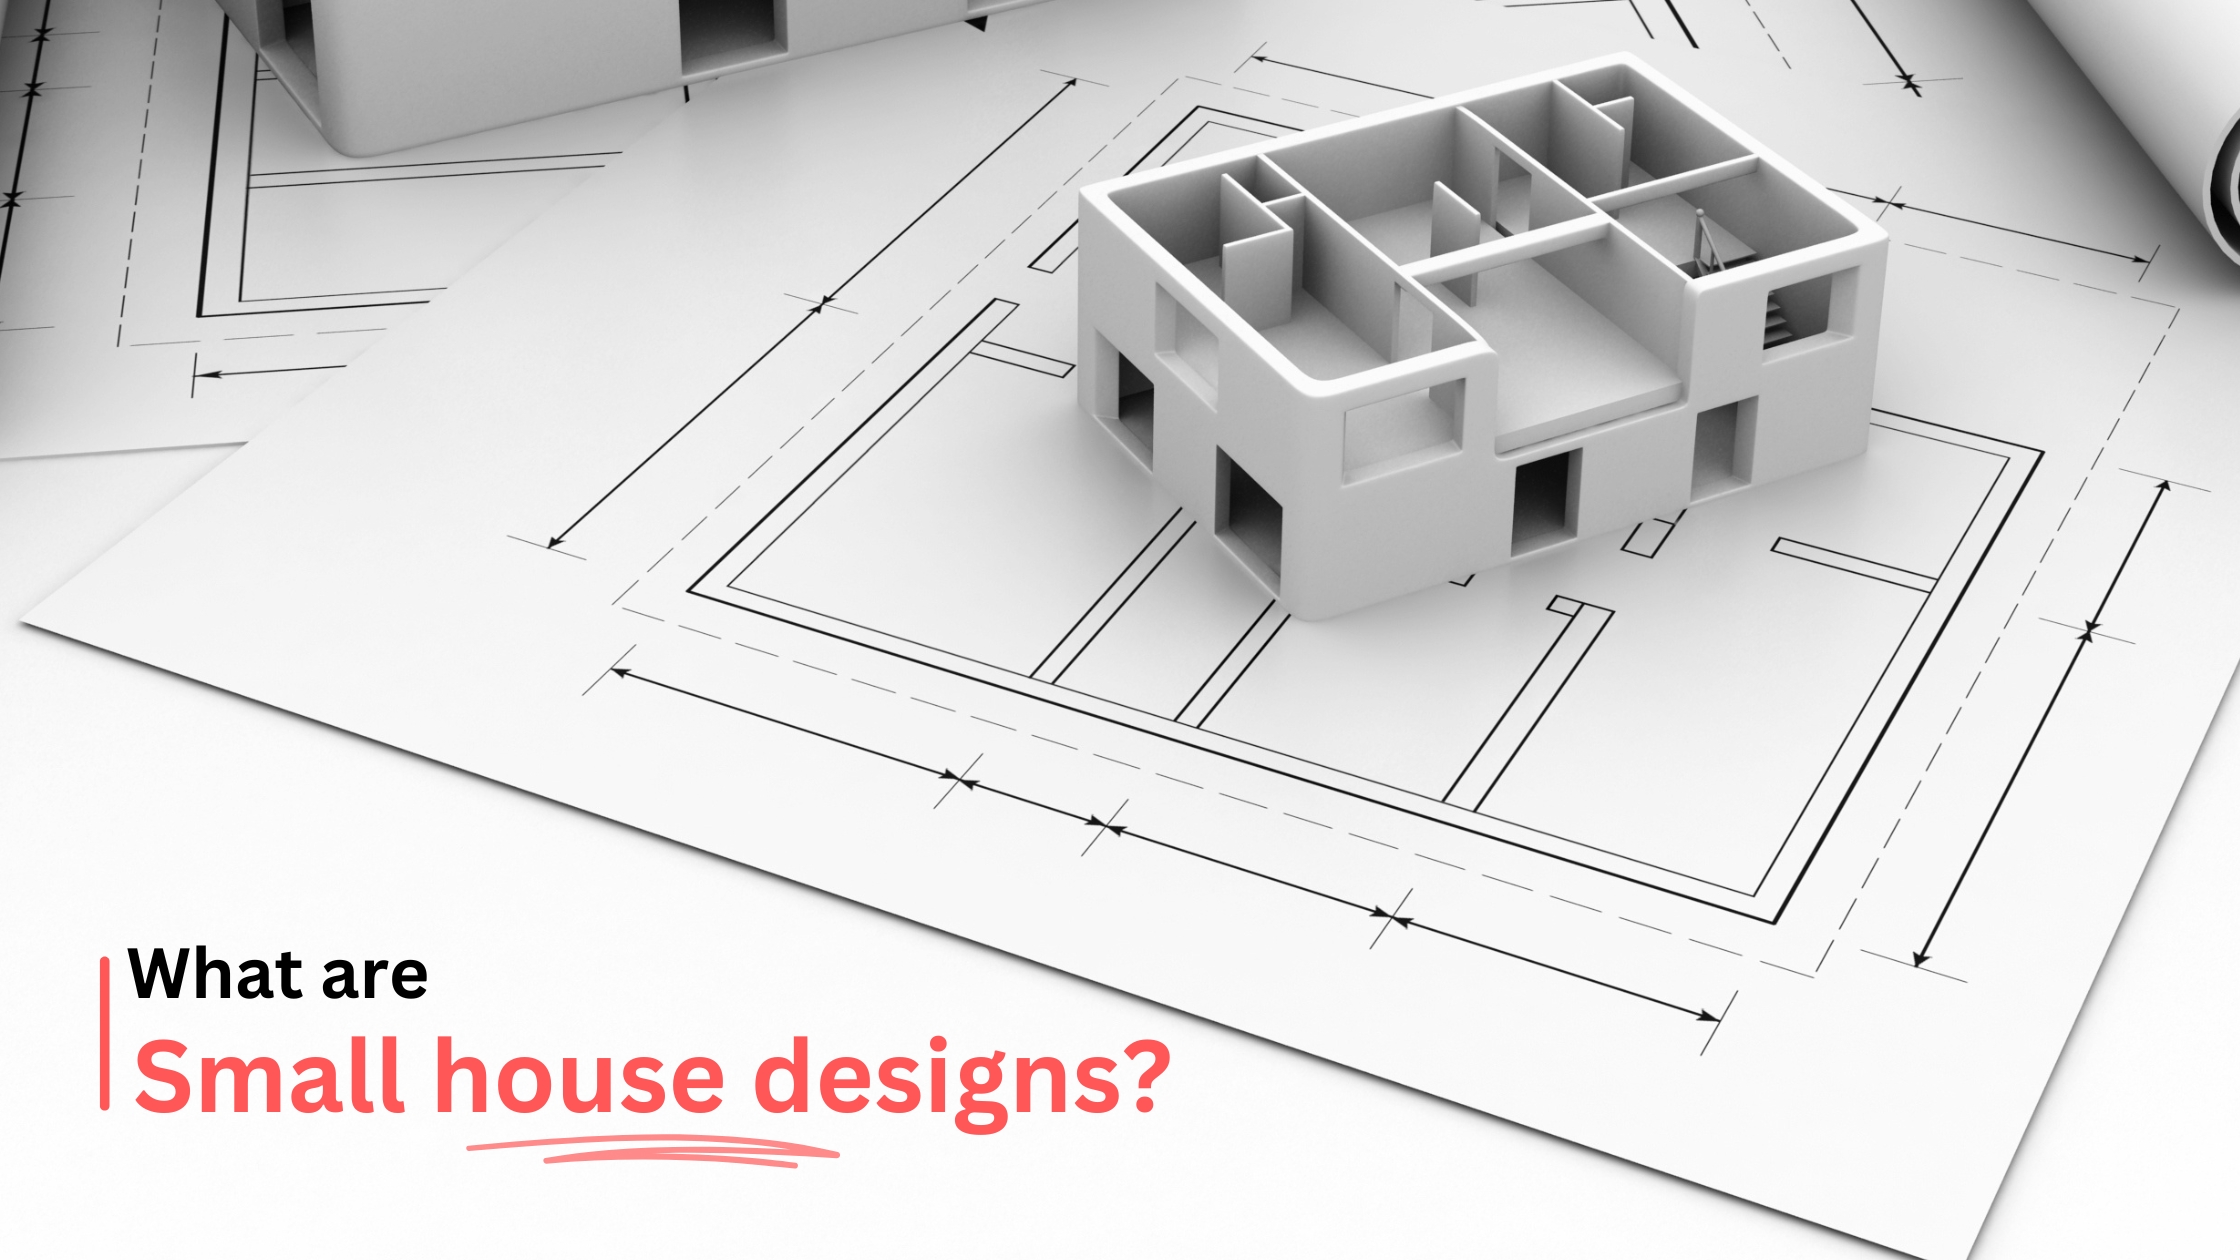 What are small house designs